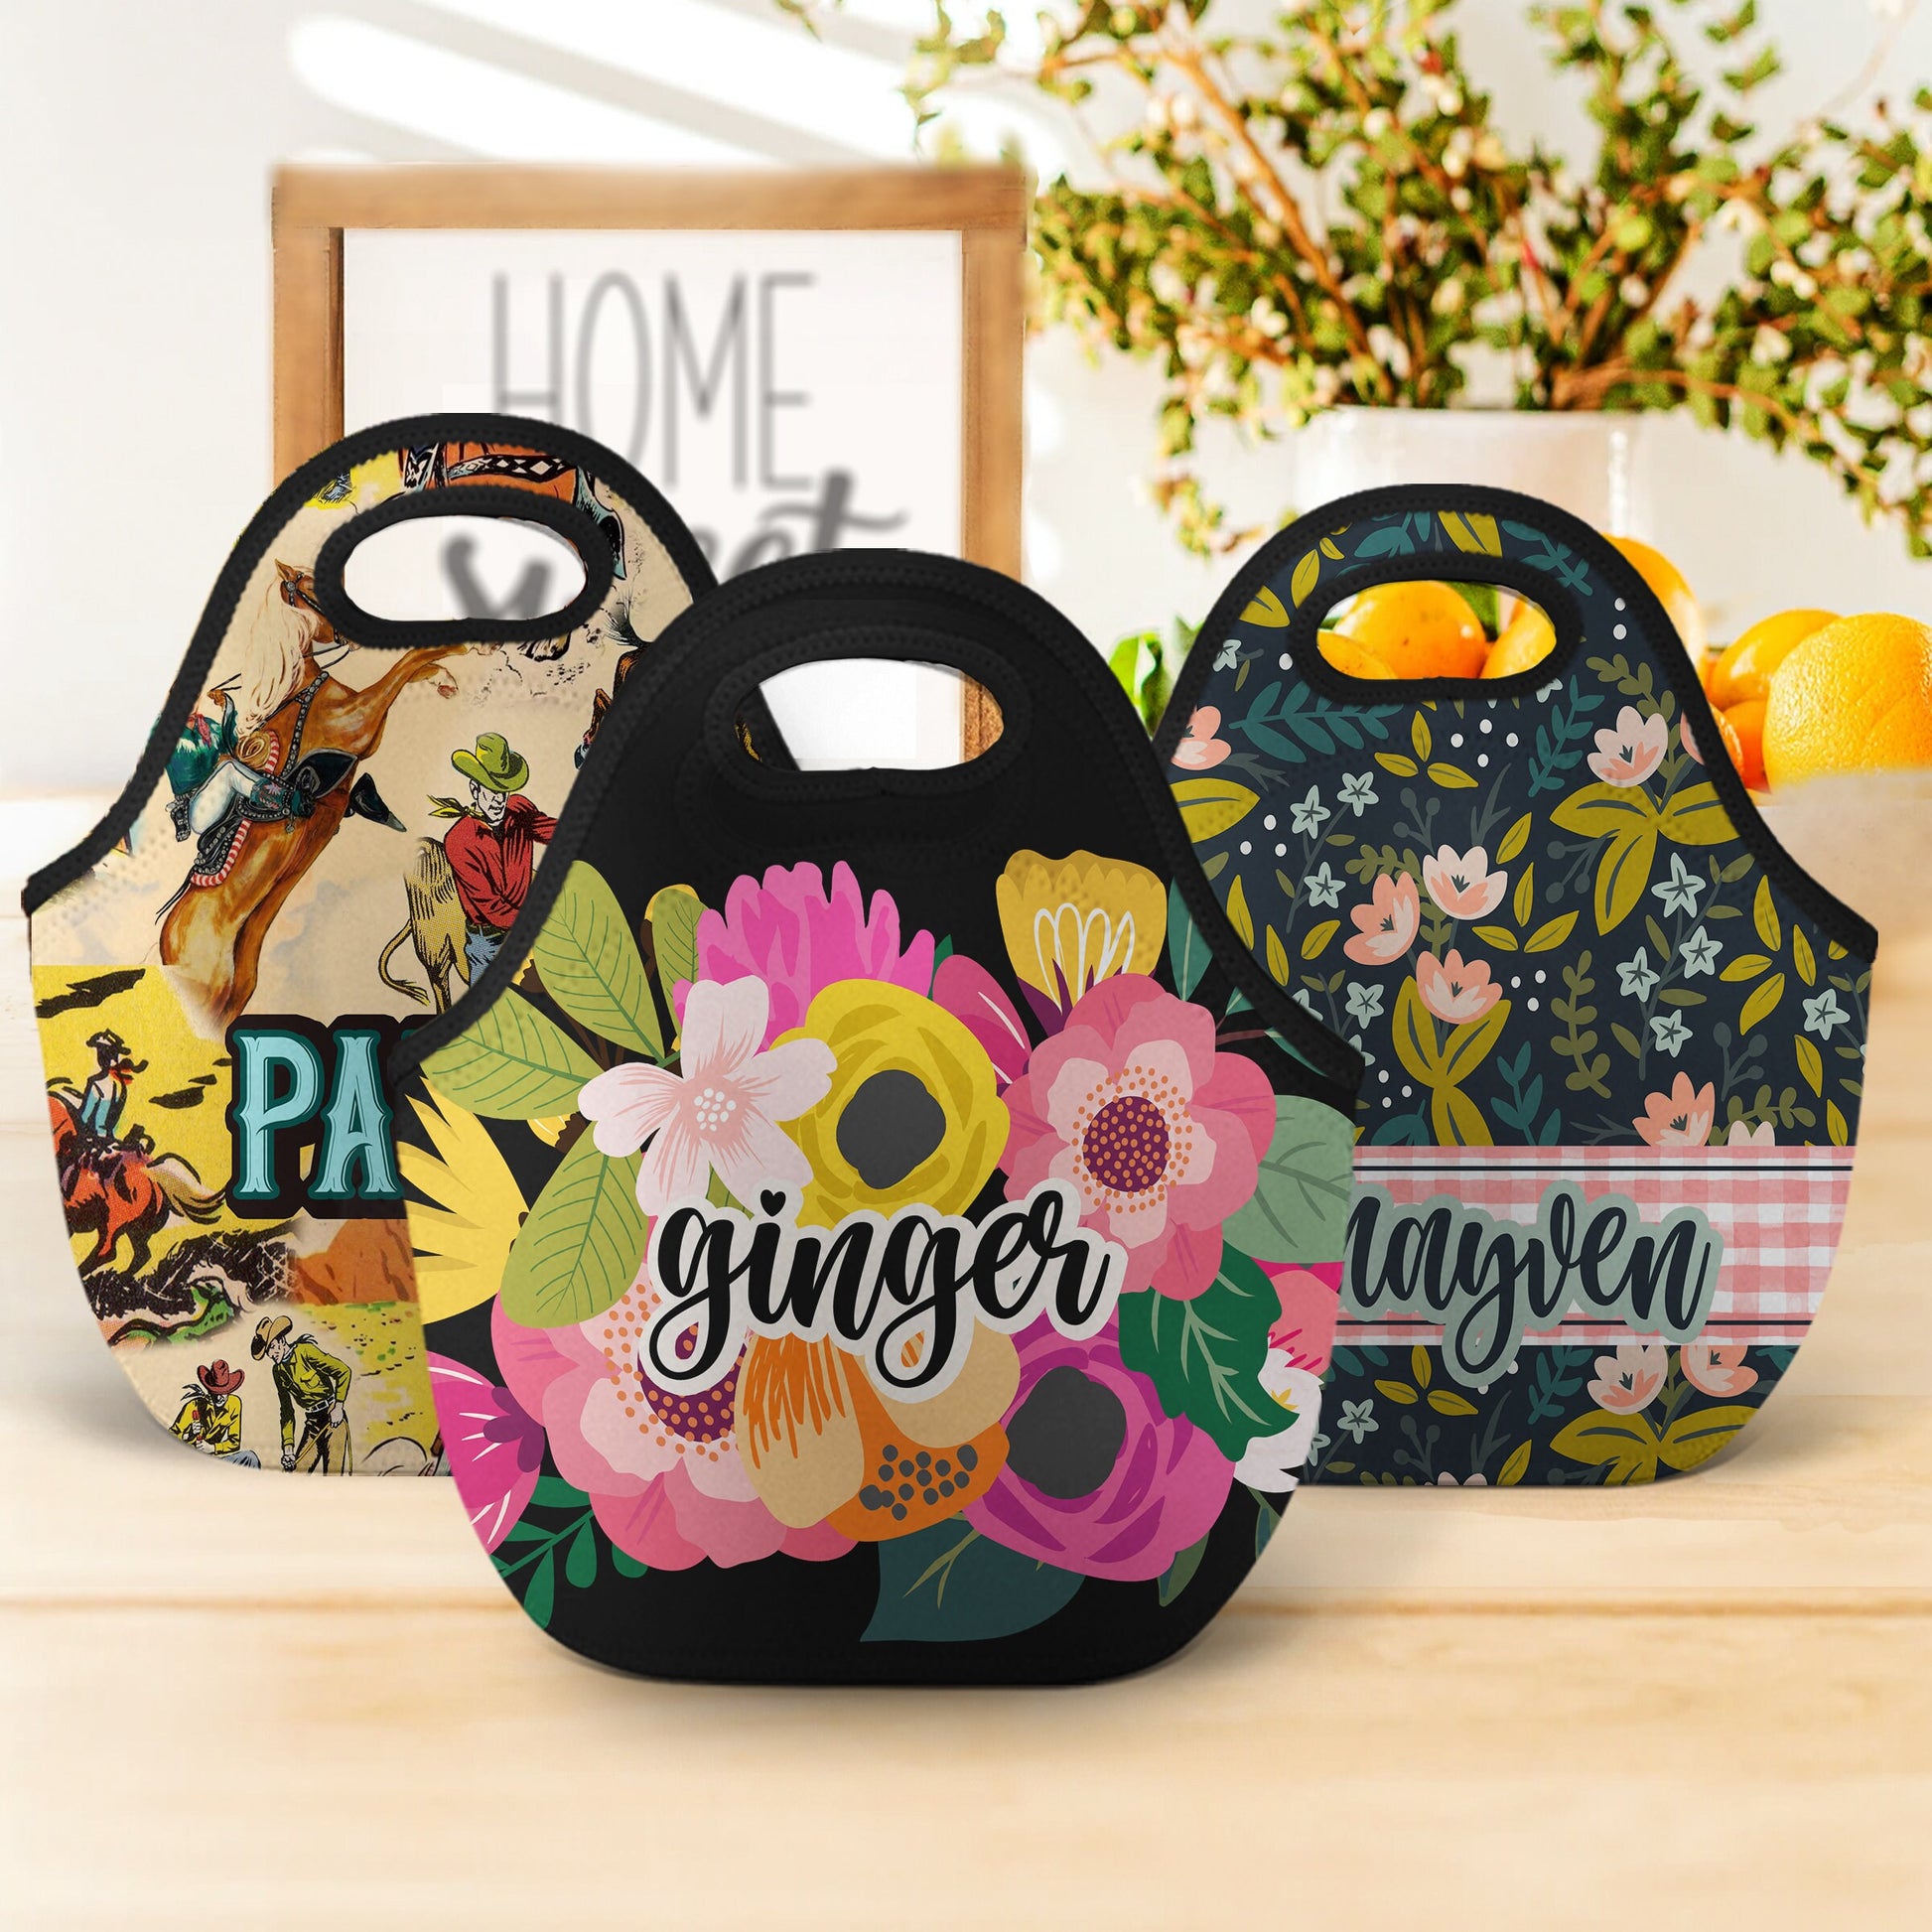 Personalized Lunch Totes, Custom Lunch Box, Monogram Lunch Bag, Custom Snack Bag, Zip Tote, Insulated Bag, Neoprene Tote, Backpack Lunch Bag